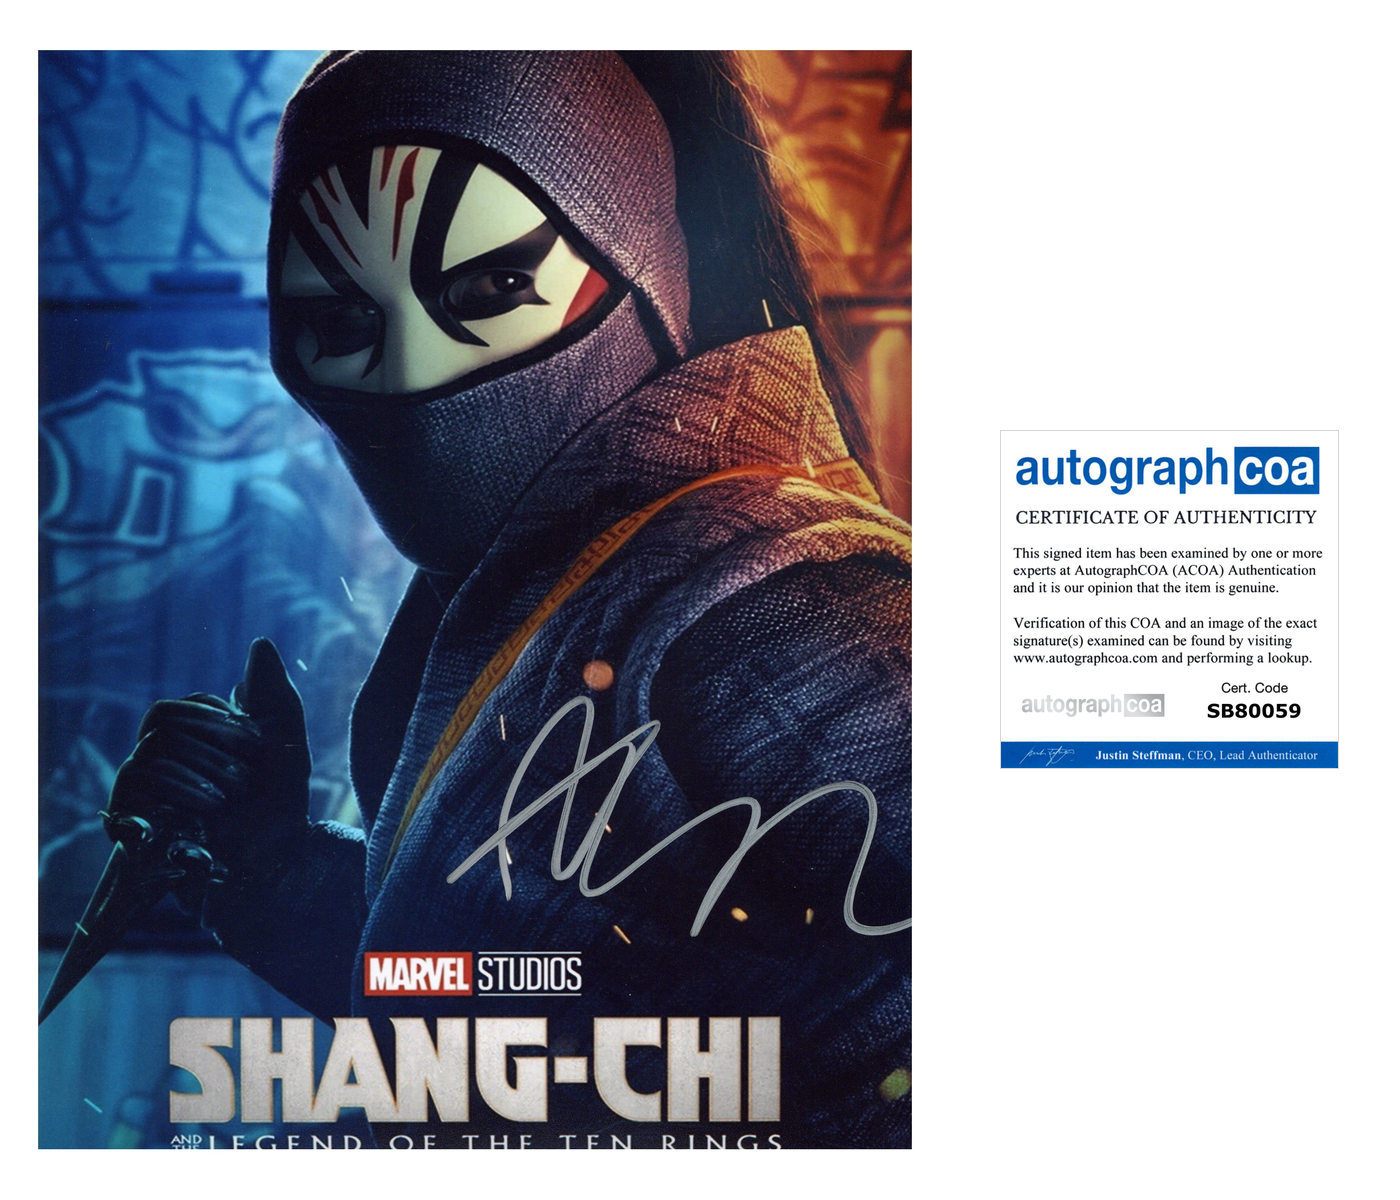 Andy Le Autographed Shang-Chi Death Dealer 8x10 Photo Signed ACOA